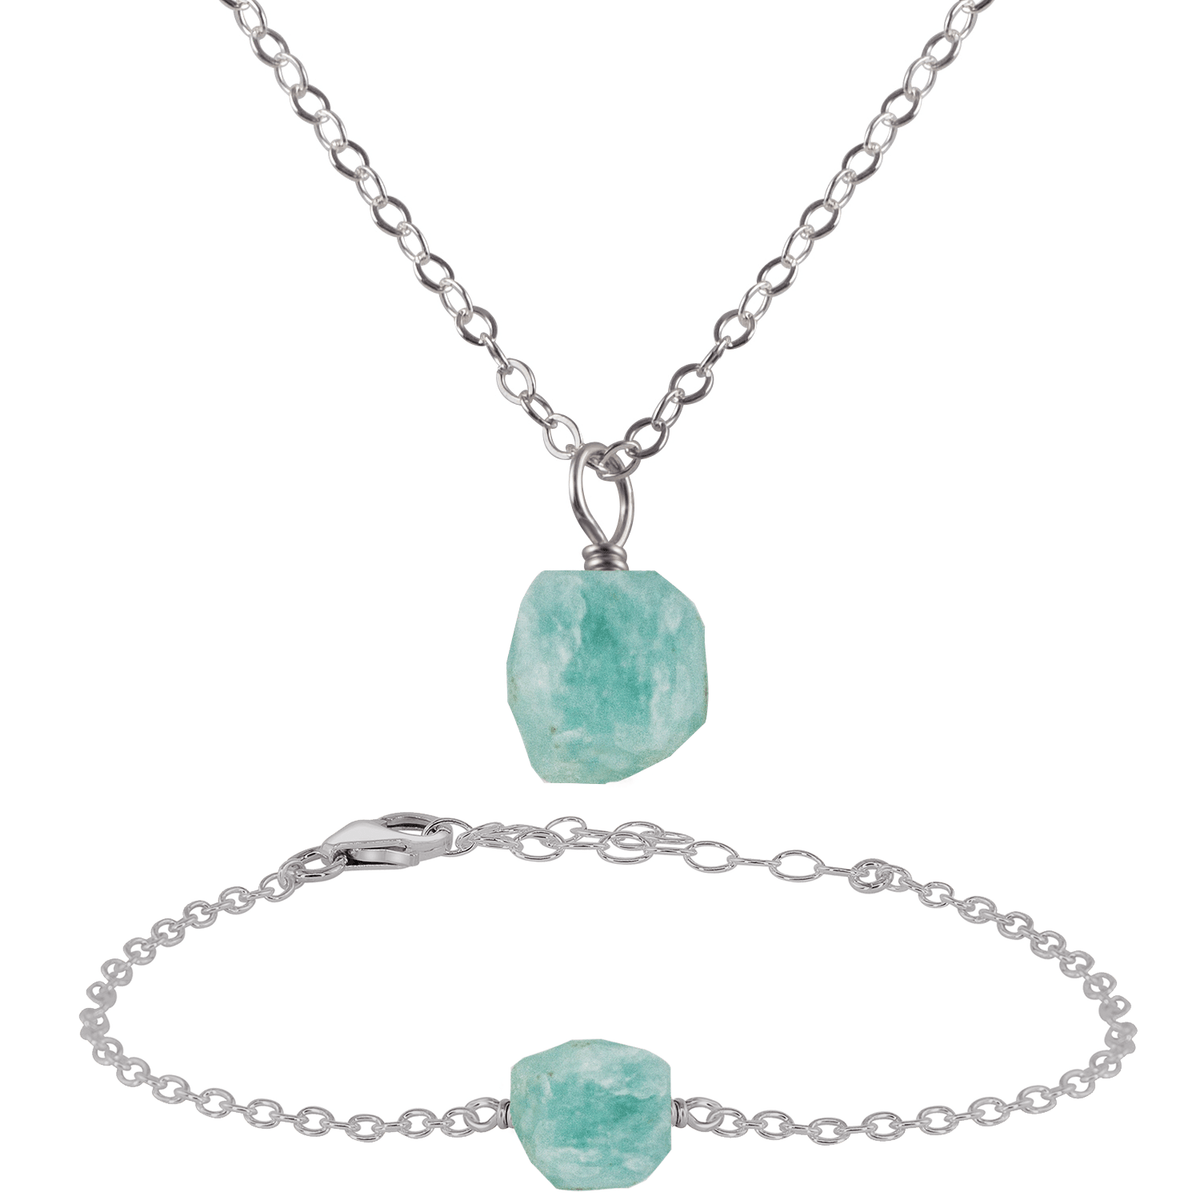 Raw Amazonite Crystal Necklace, Earrings and Bracelet Set - Raw Amazonite Crystal Necklace, Earrings and Bracelet Set - Sterling Silver / Satellite / Necklace & Bracelet - Luna Tide Handmade Crystal Jewellery